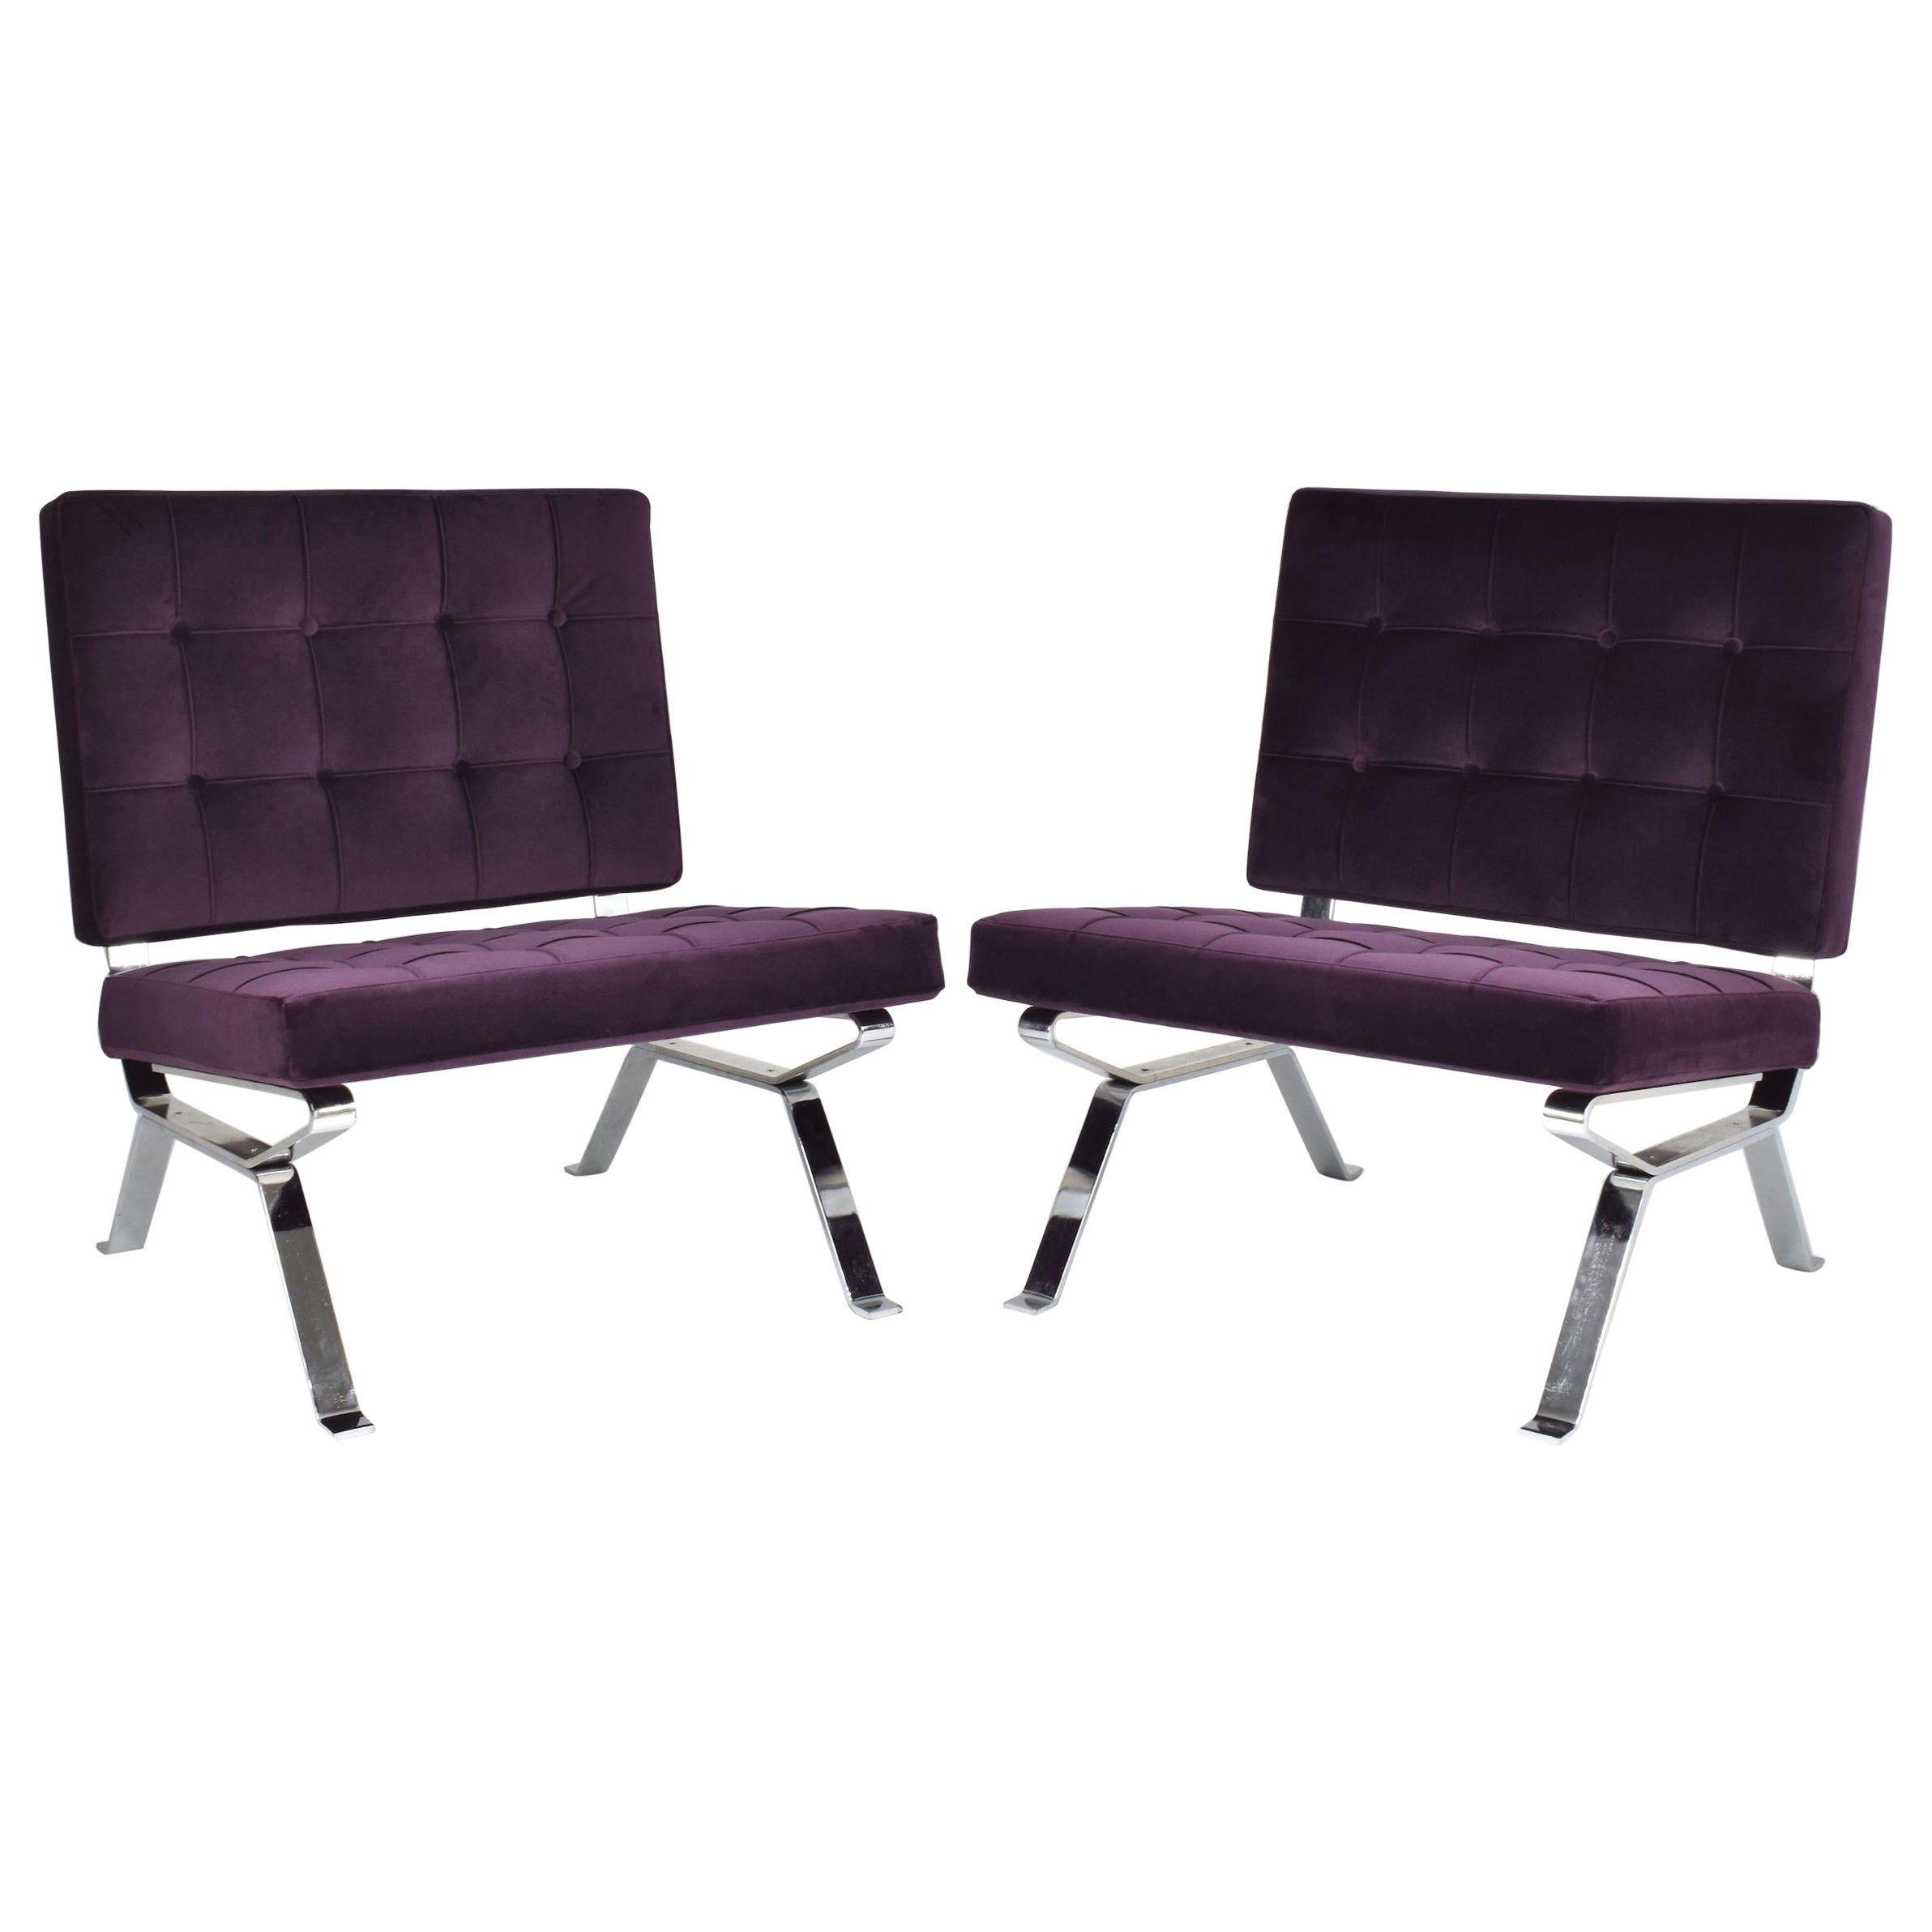 Pair of Italian Midcentury Dione Gastone Rinaldi Lounge Chairs, 1950s For Sale